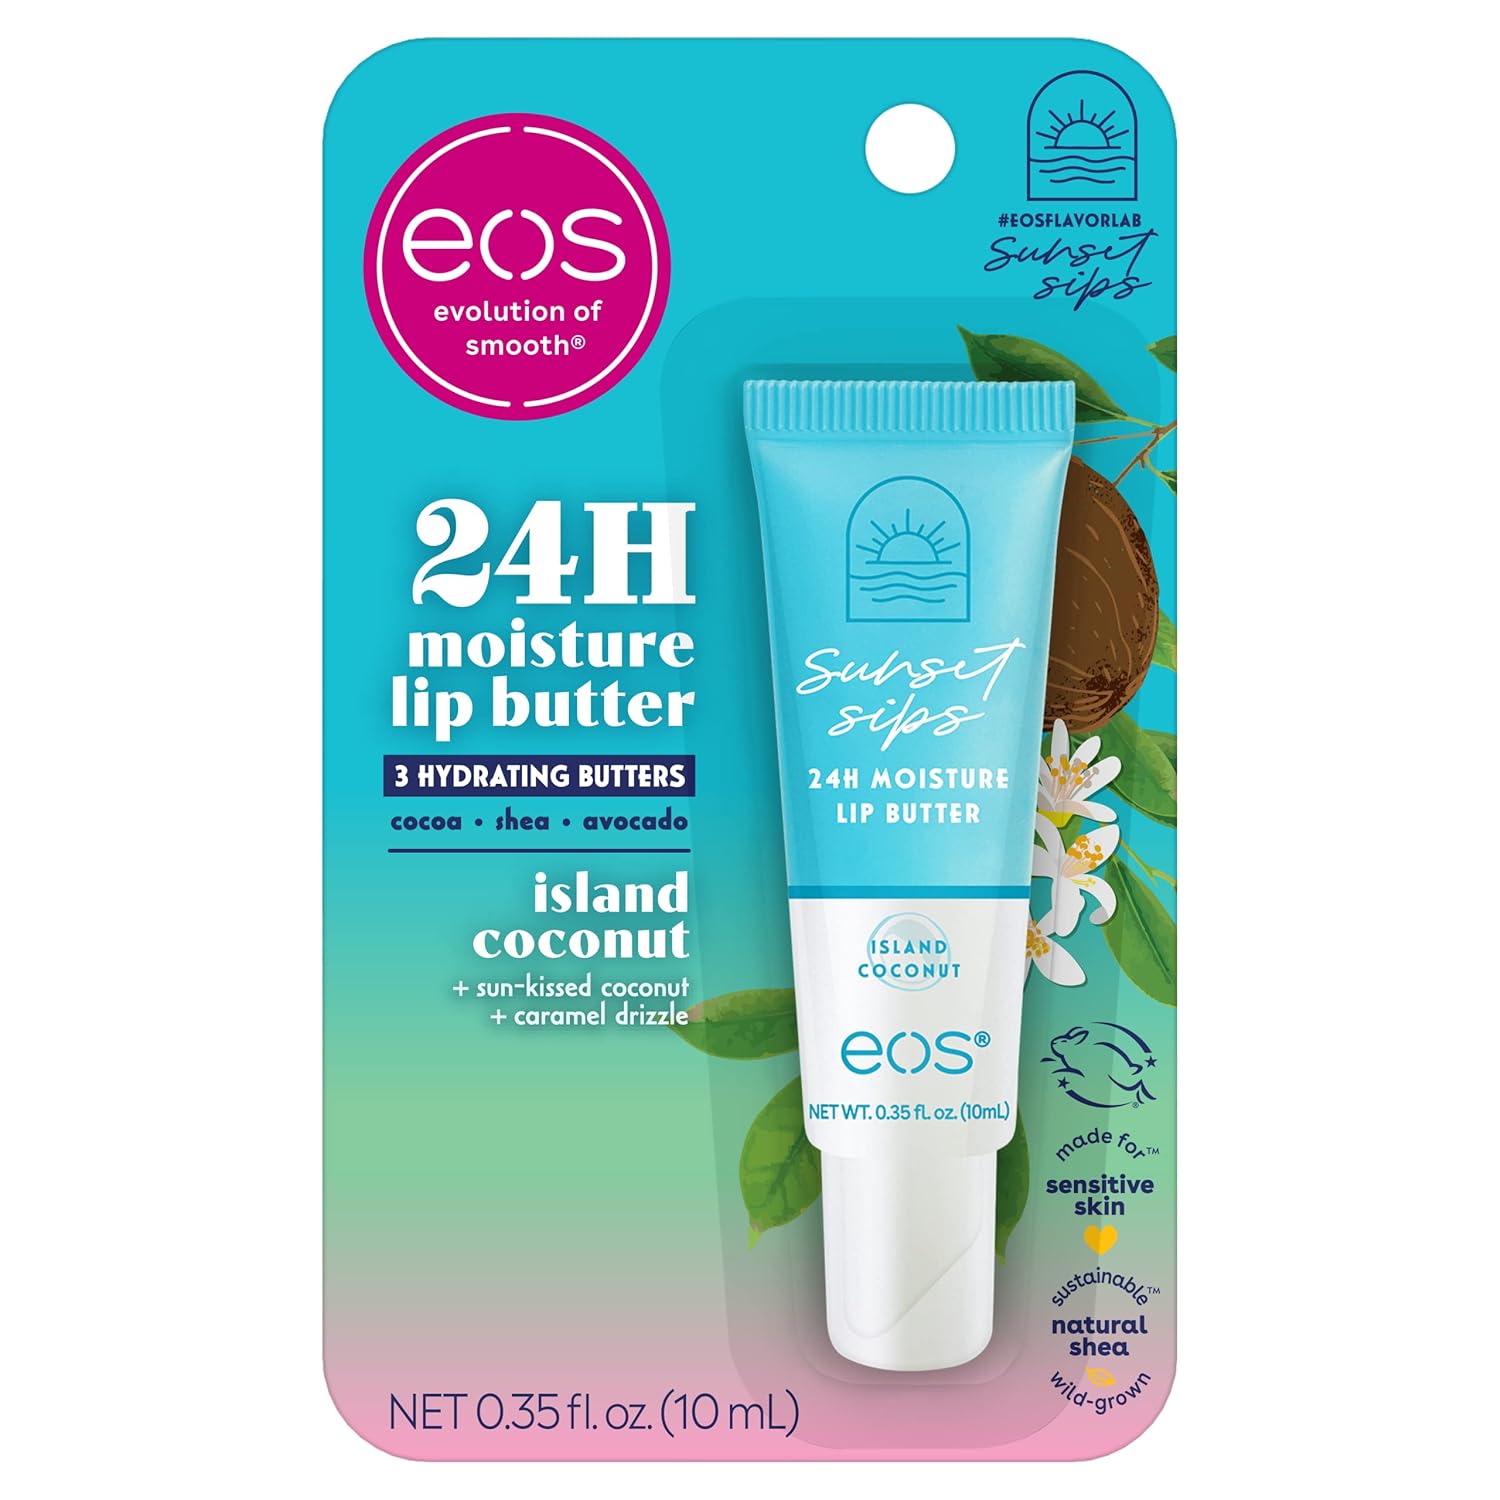 eos Sunset Sips Lip Butter Tube- Island Coconut, 24-Hour Moisture, Overnight Lip Mask, Lip Care Products, 0.35 fl oz